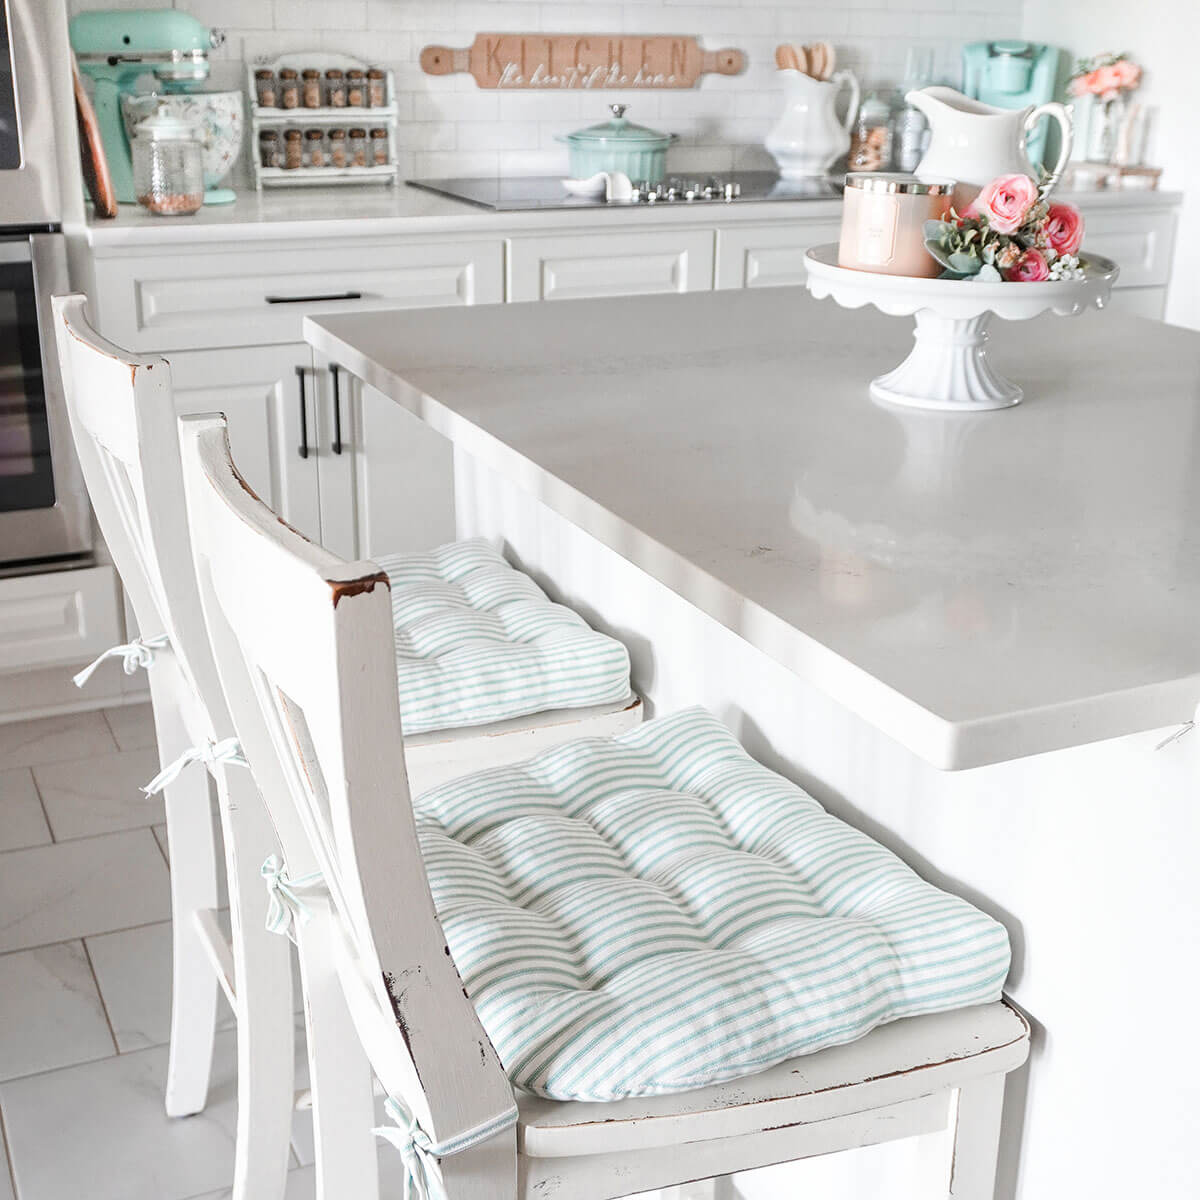 aqua ticking stripe dining chair cushions on bar height chairs at kitchen island in farmhouse style kitchen by kate schwanke